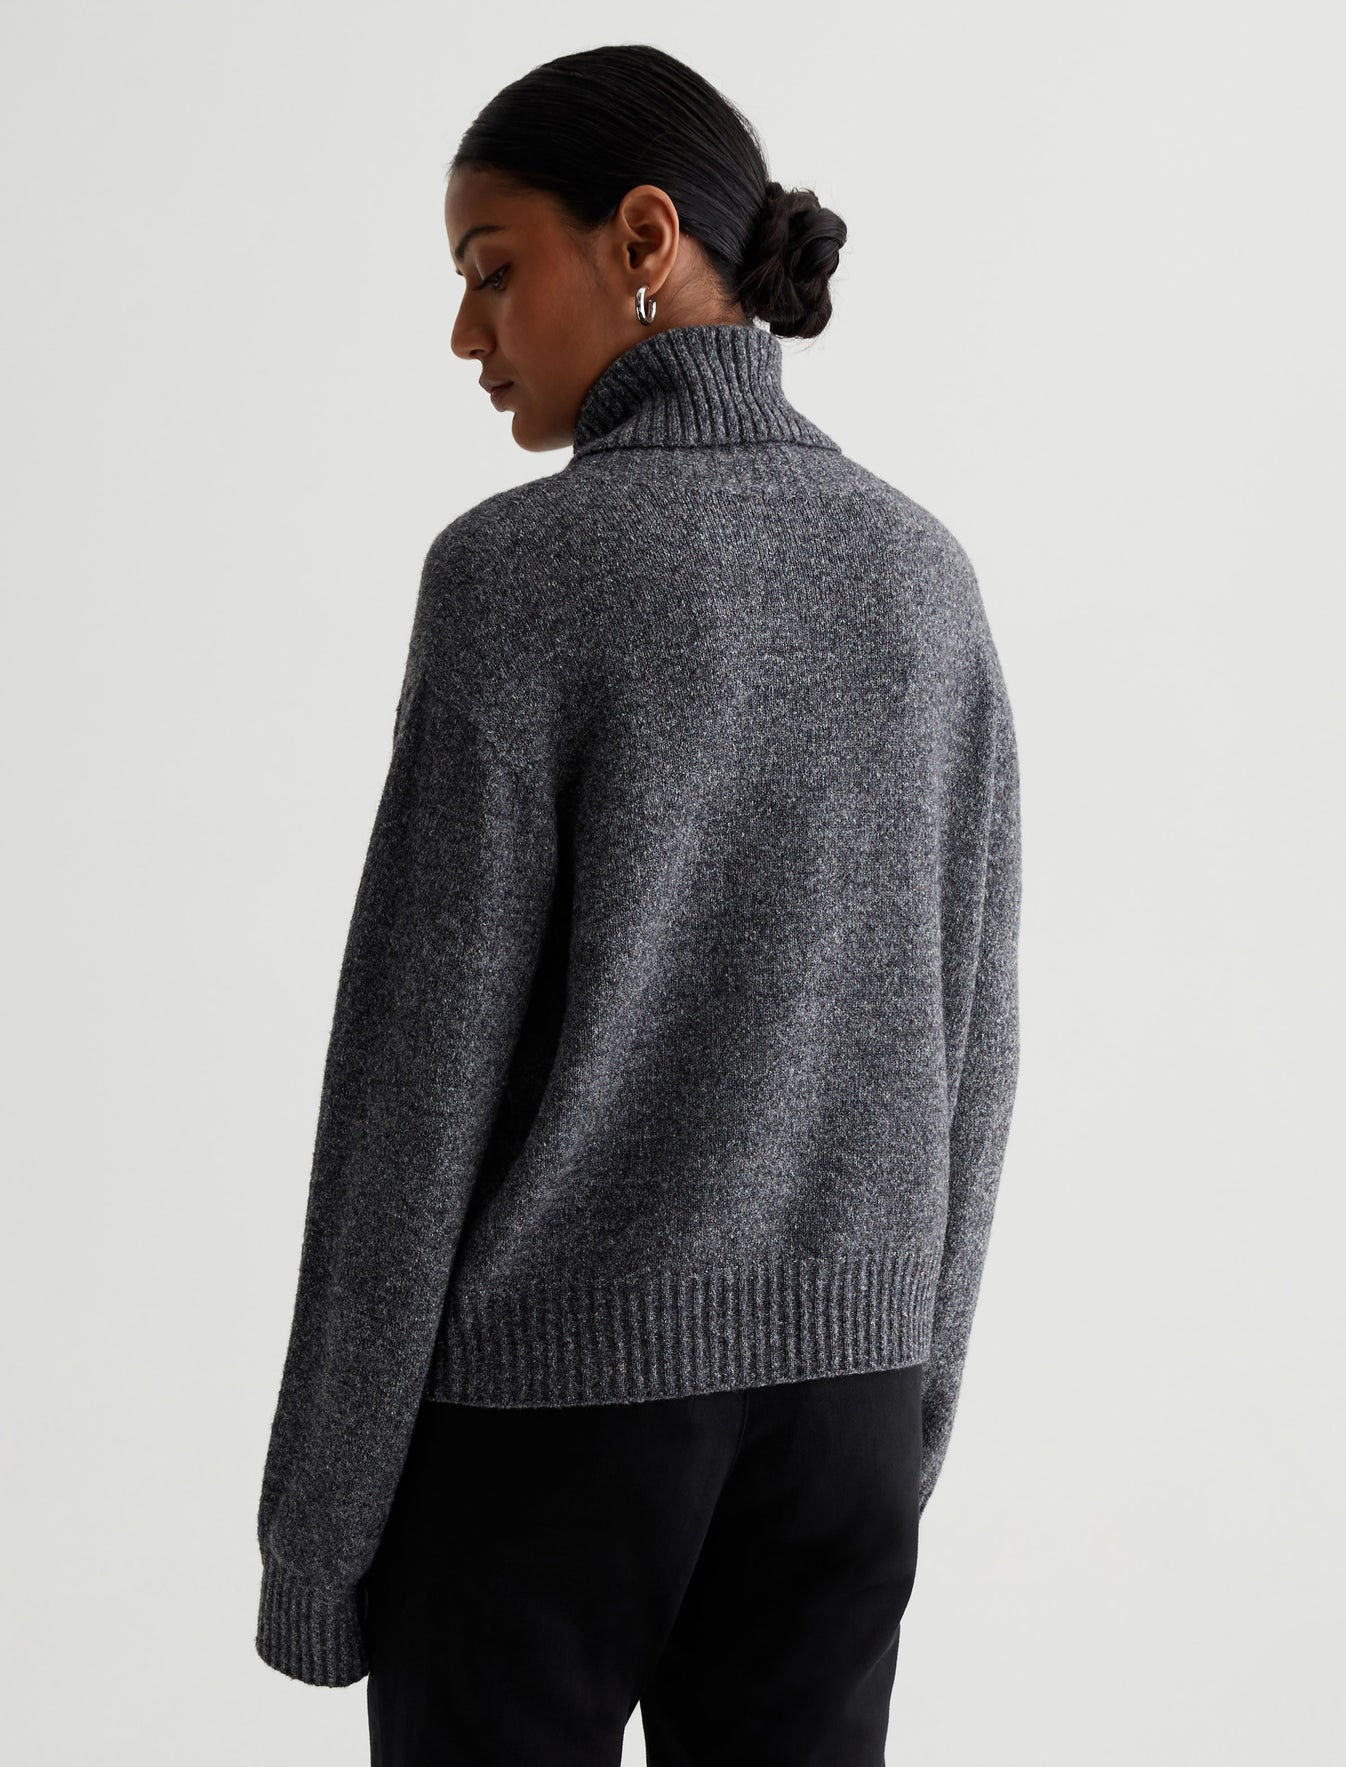 Bellona Heather Charcoal Relaxed Turtleneck Sweater Photo 6